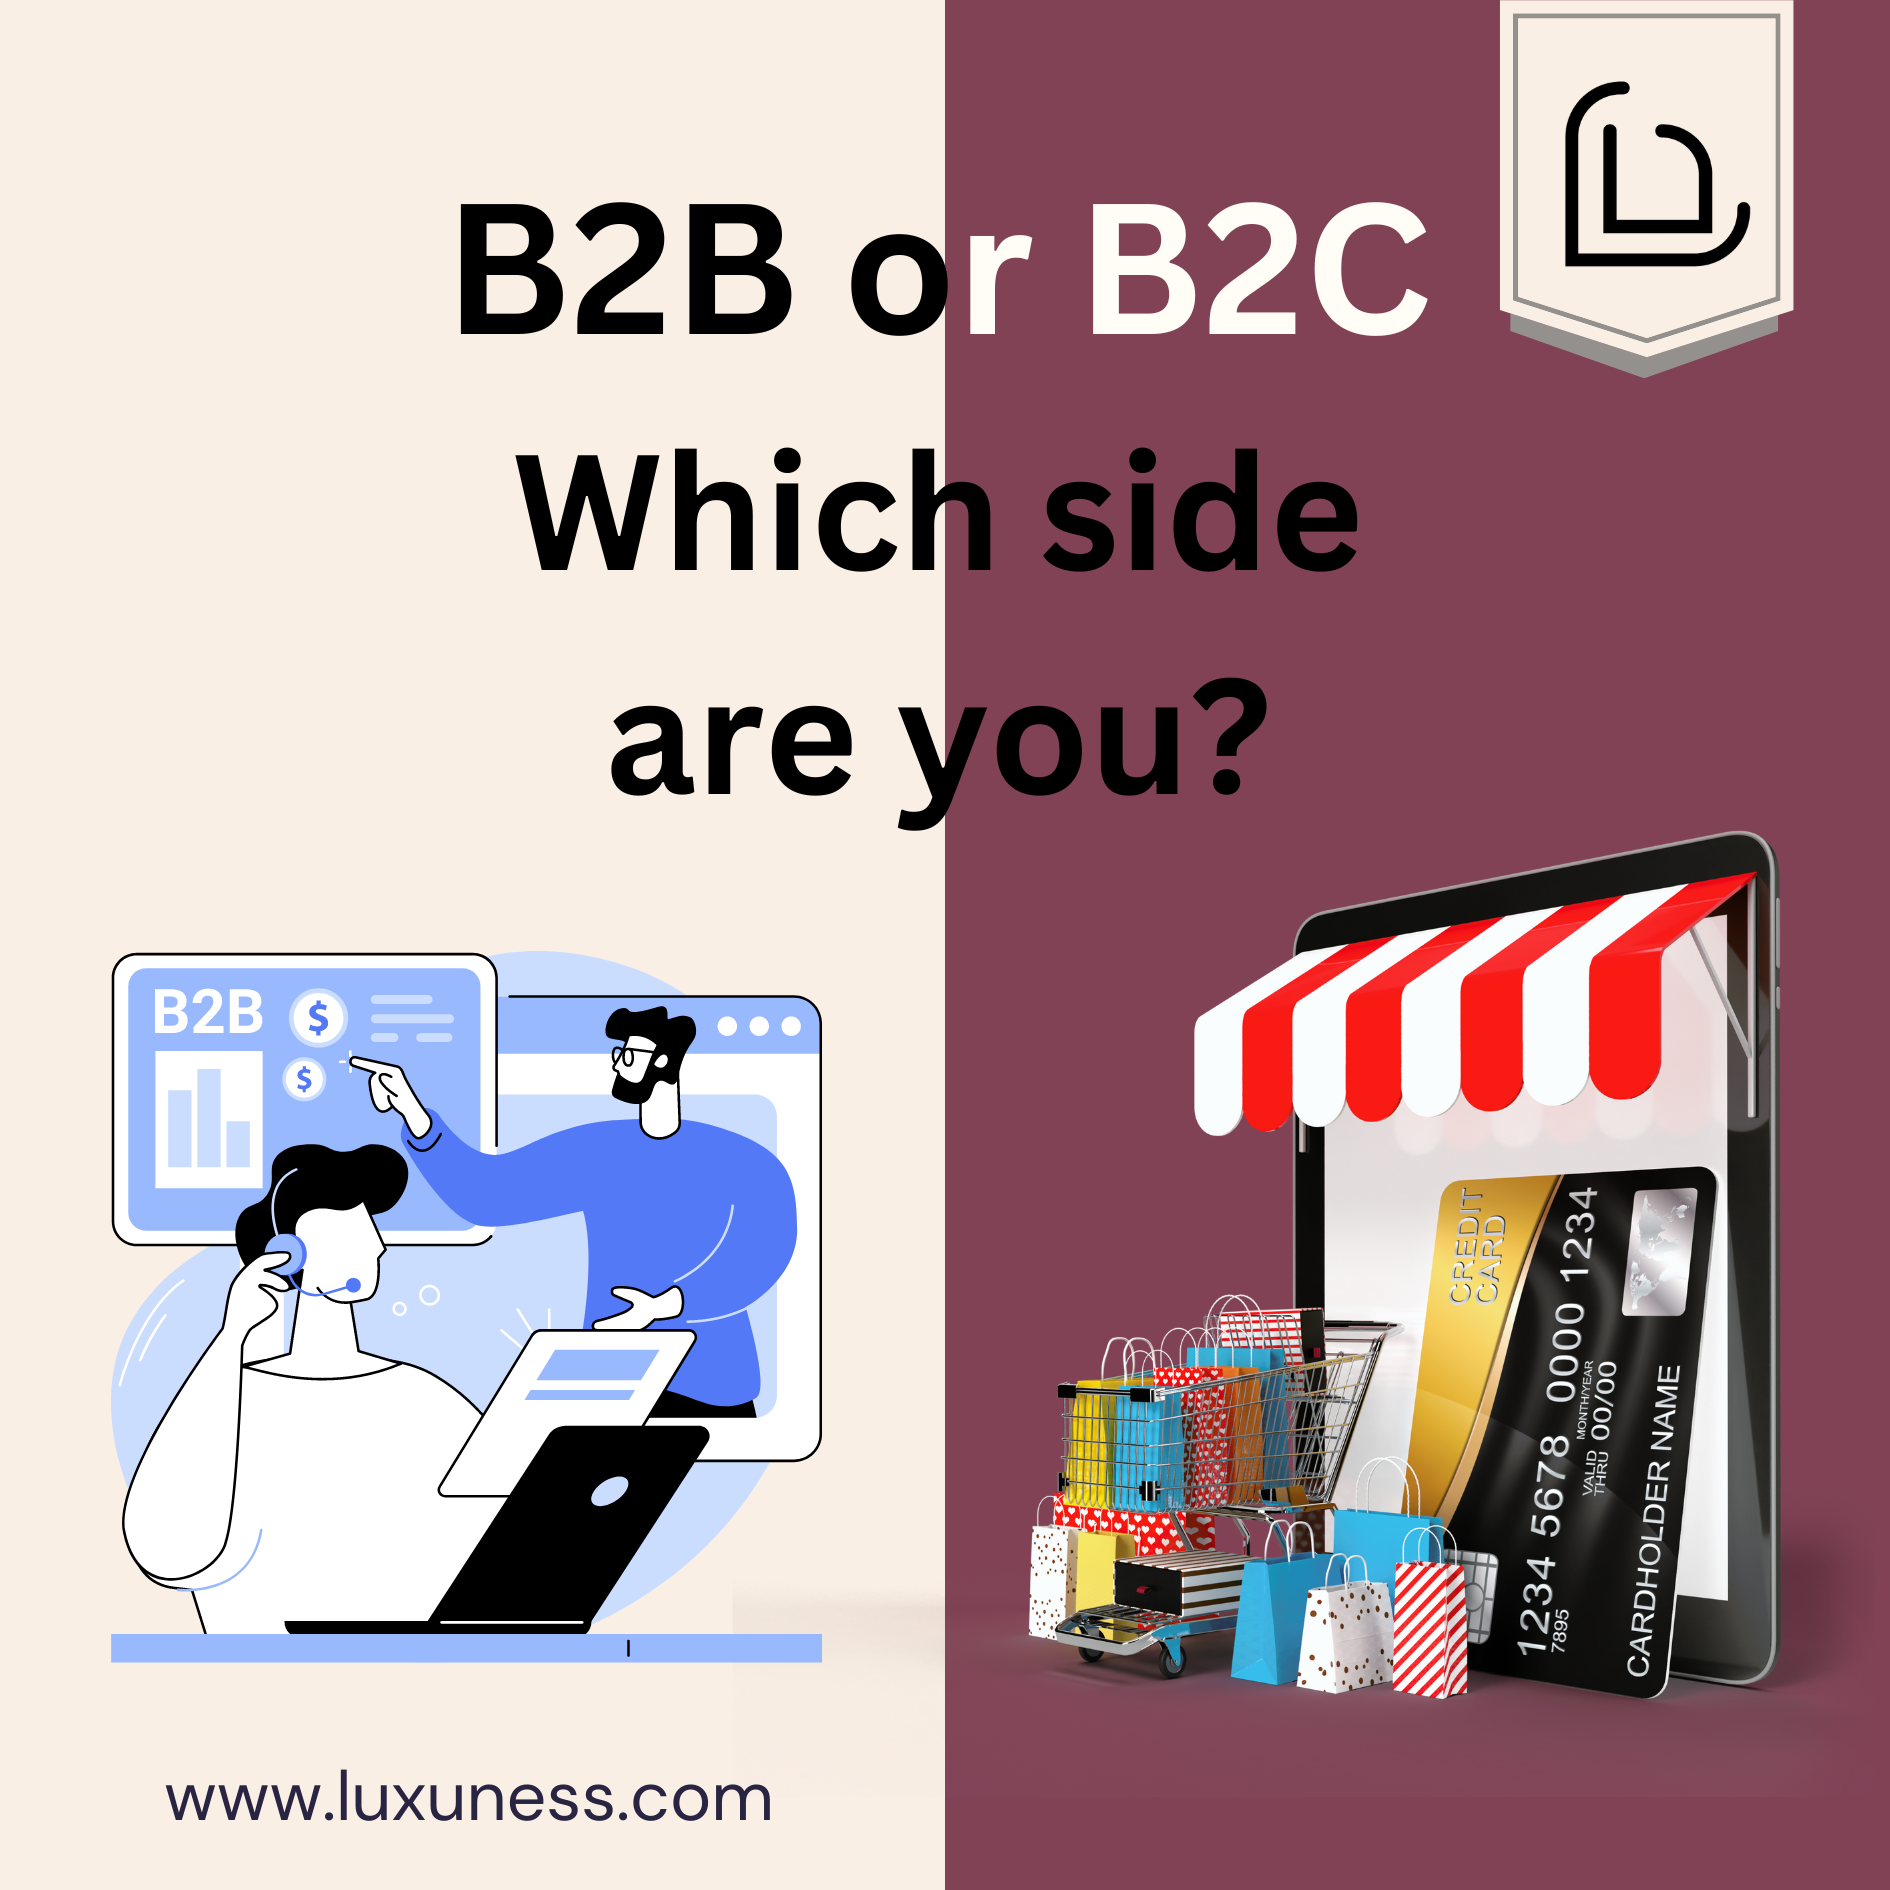 B2B or B2C Ecommerce. Which side are you?